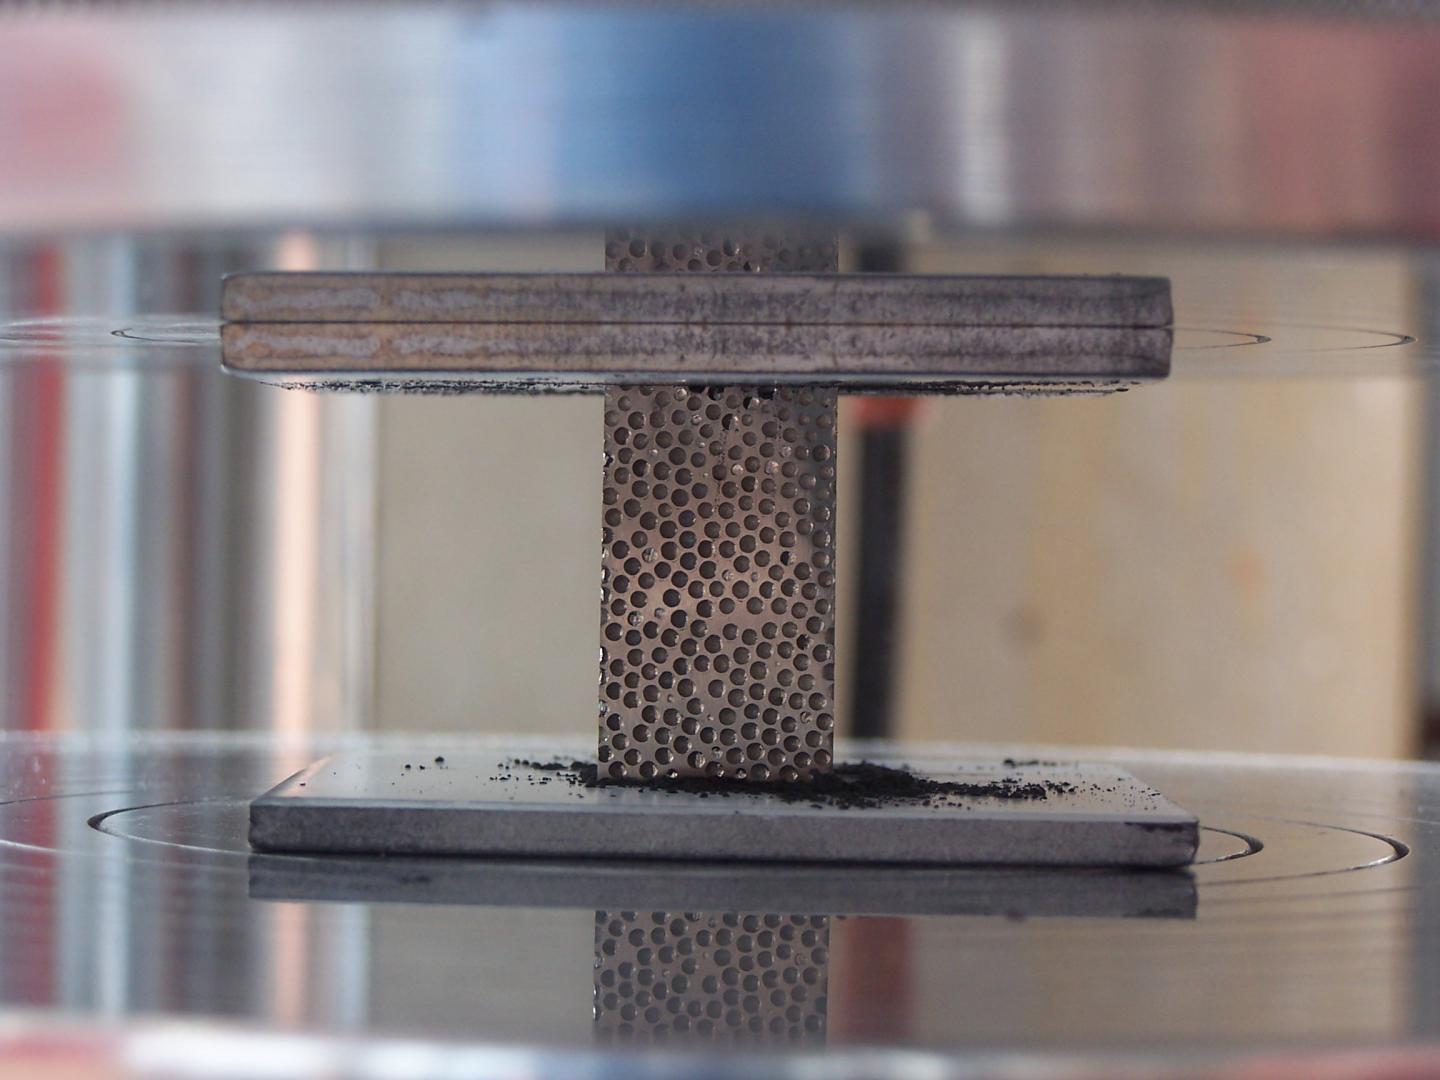 Metal Foam Can Handle X-Rays, Gamma Rays, Neutron Radiation -- and More